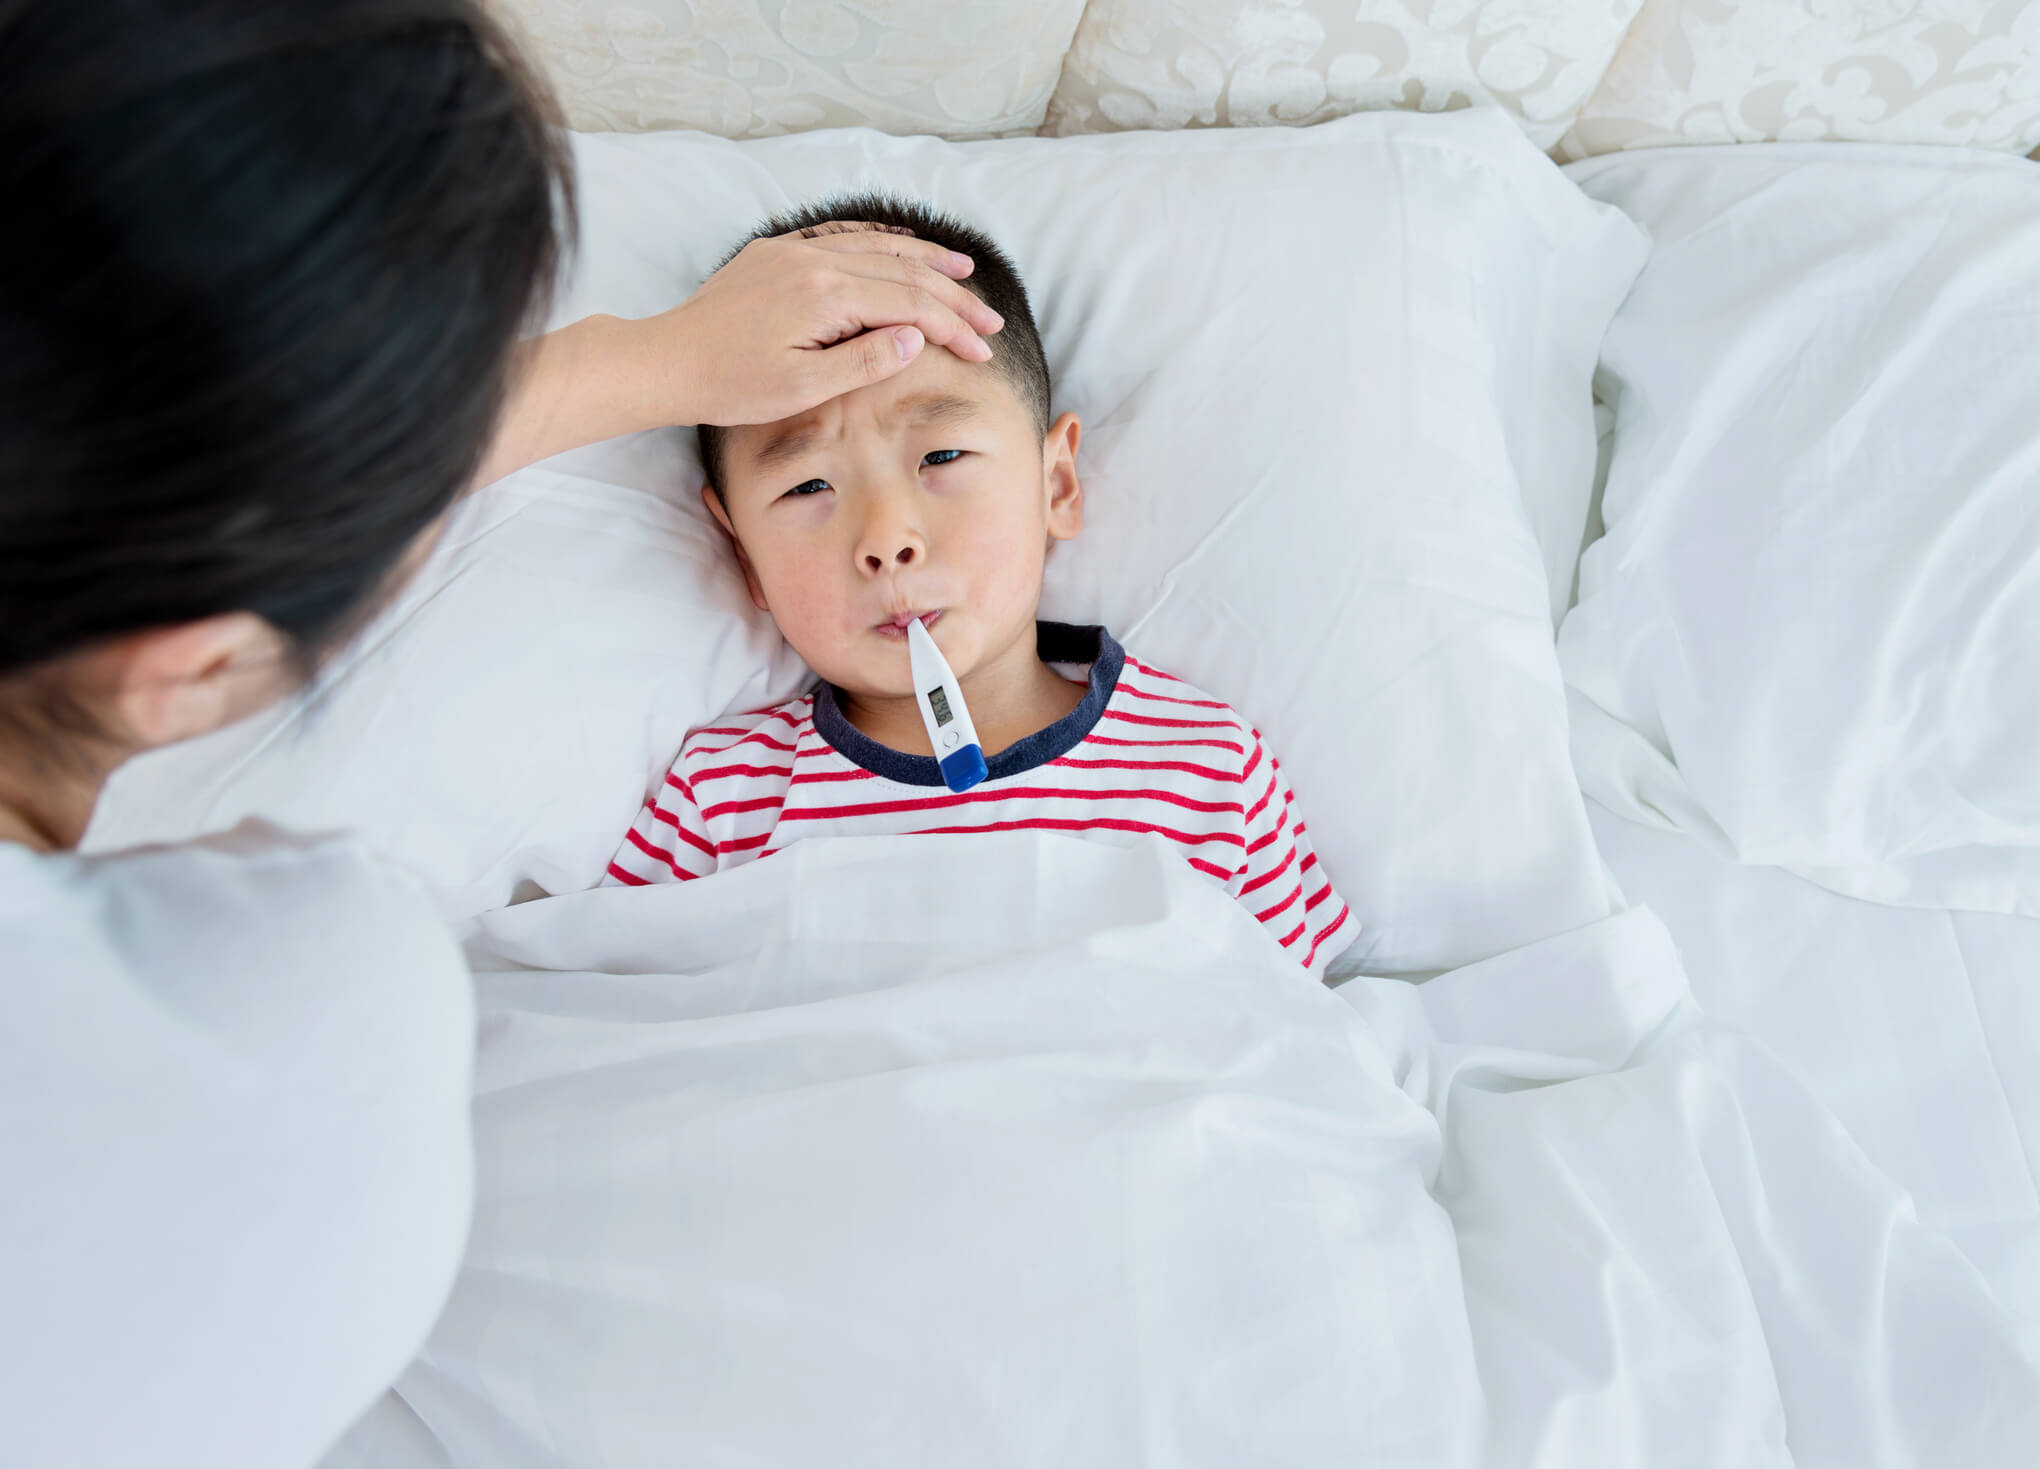 A sick child in bed with a thermometer in his mouth